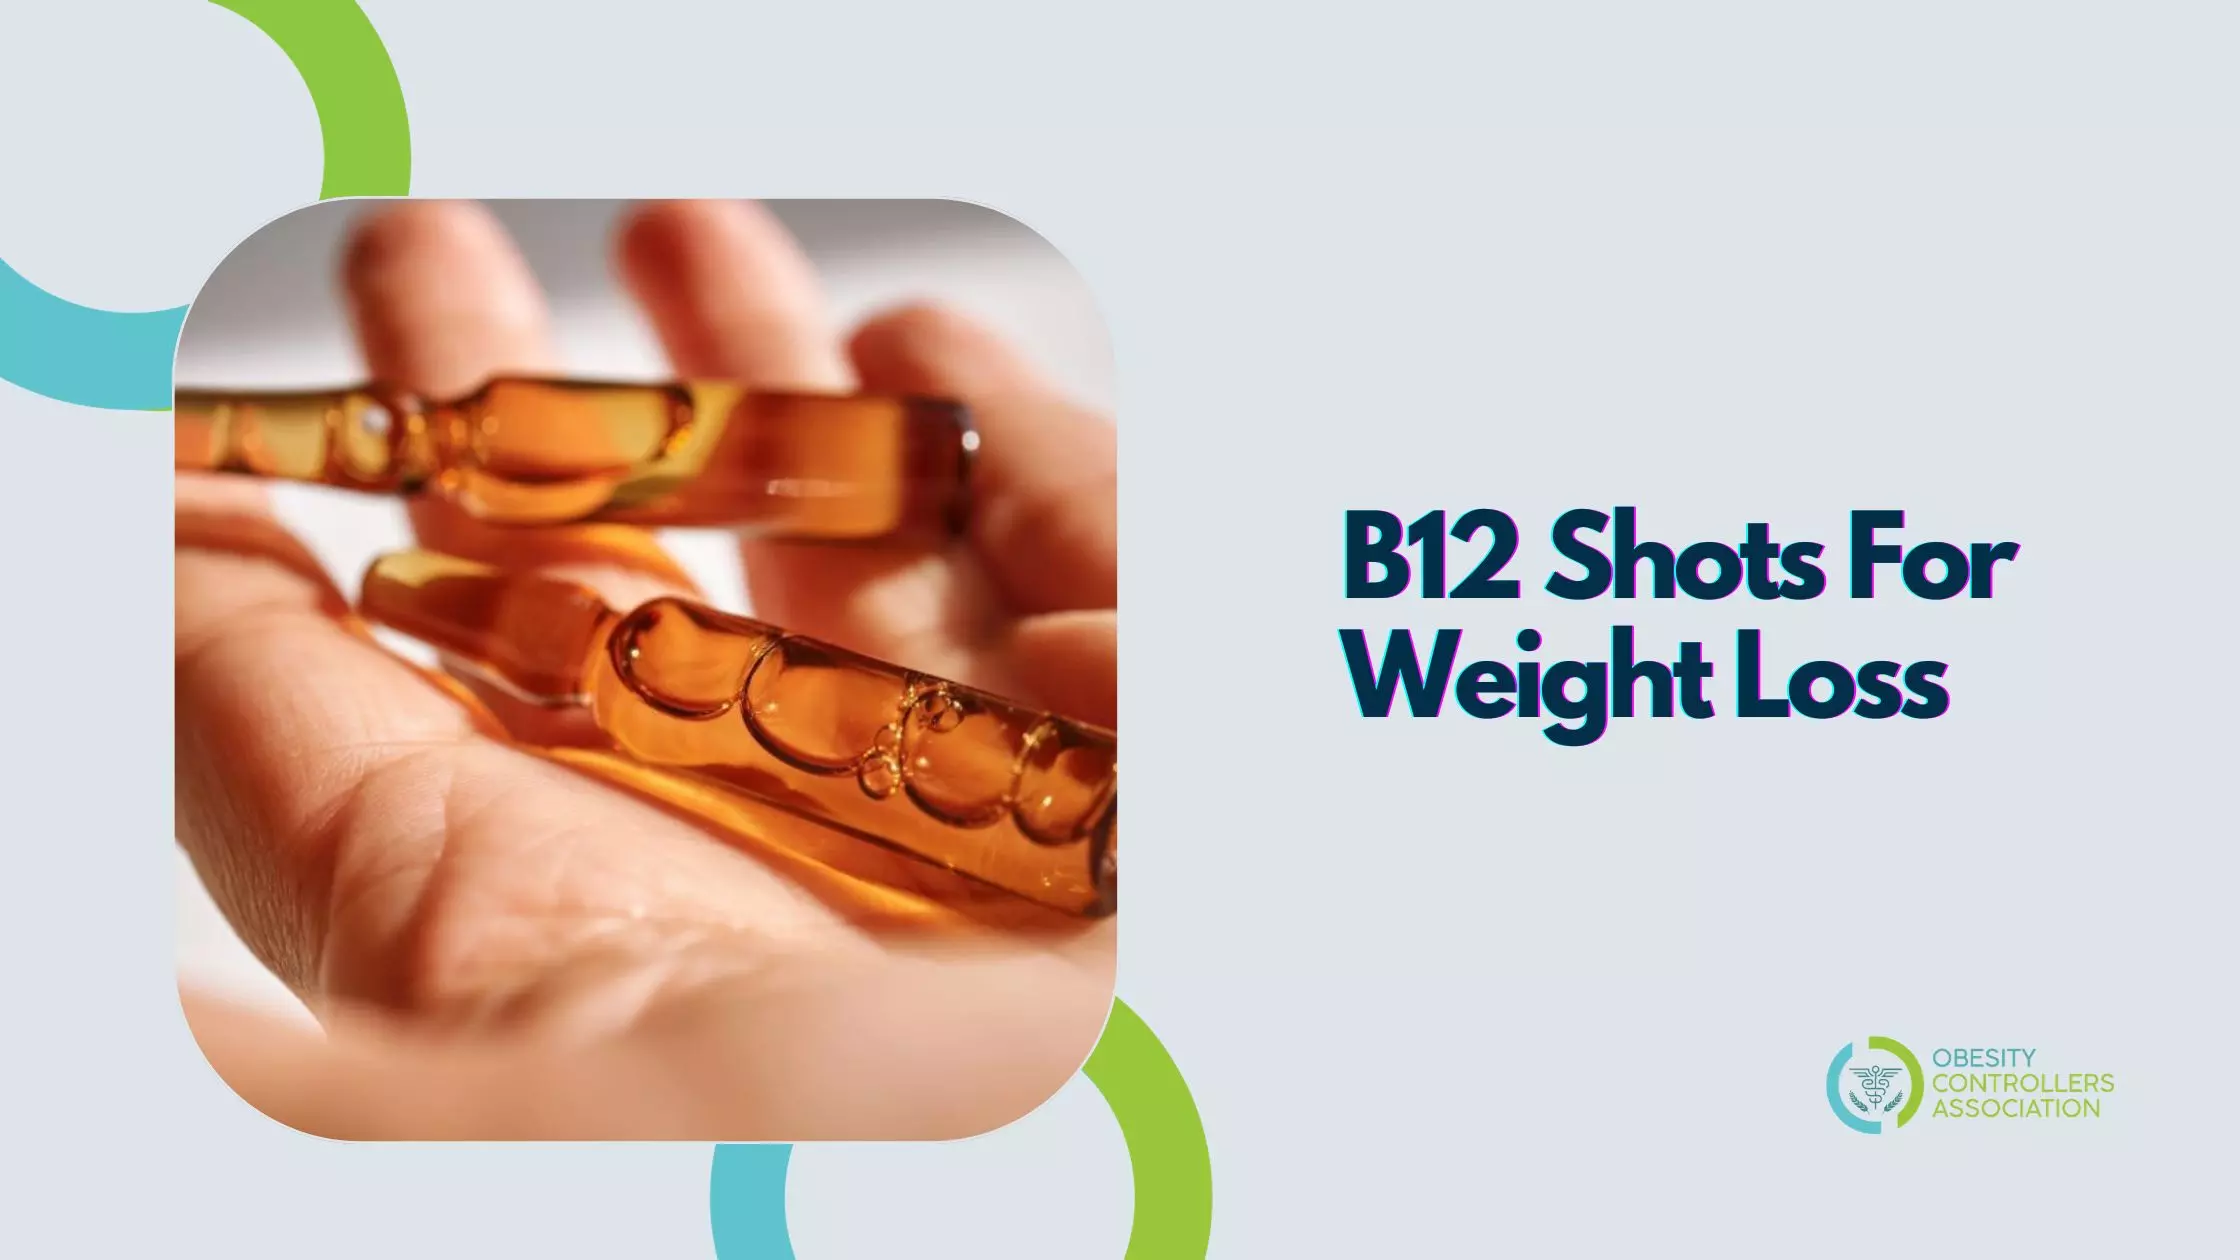 B12 Shots For Weight Loss